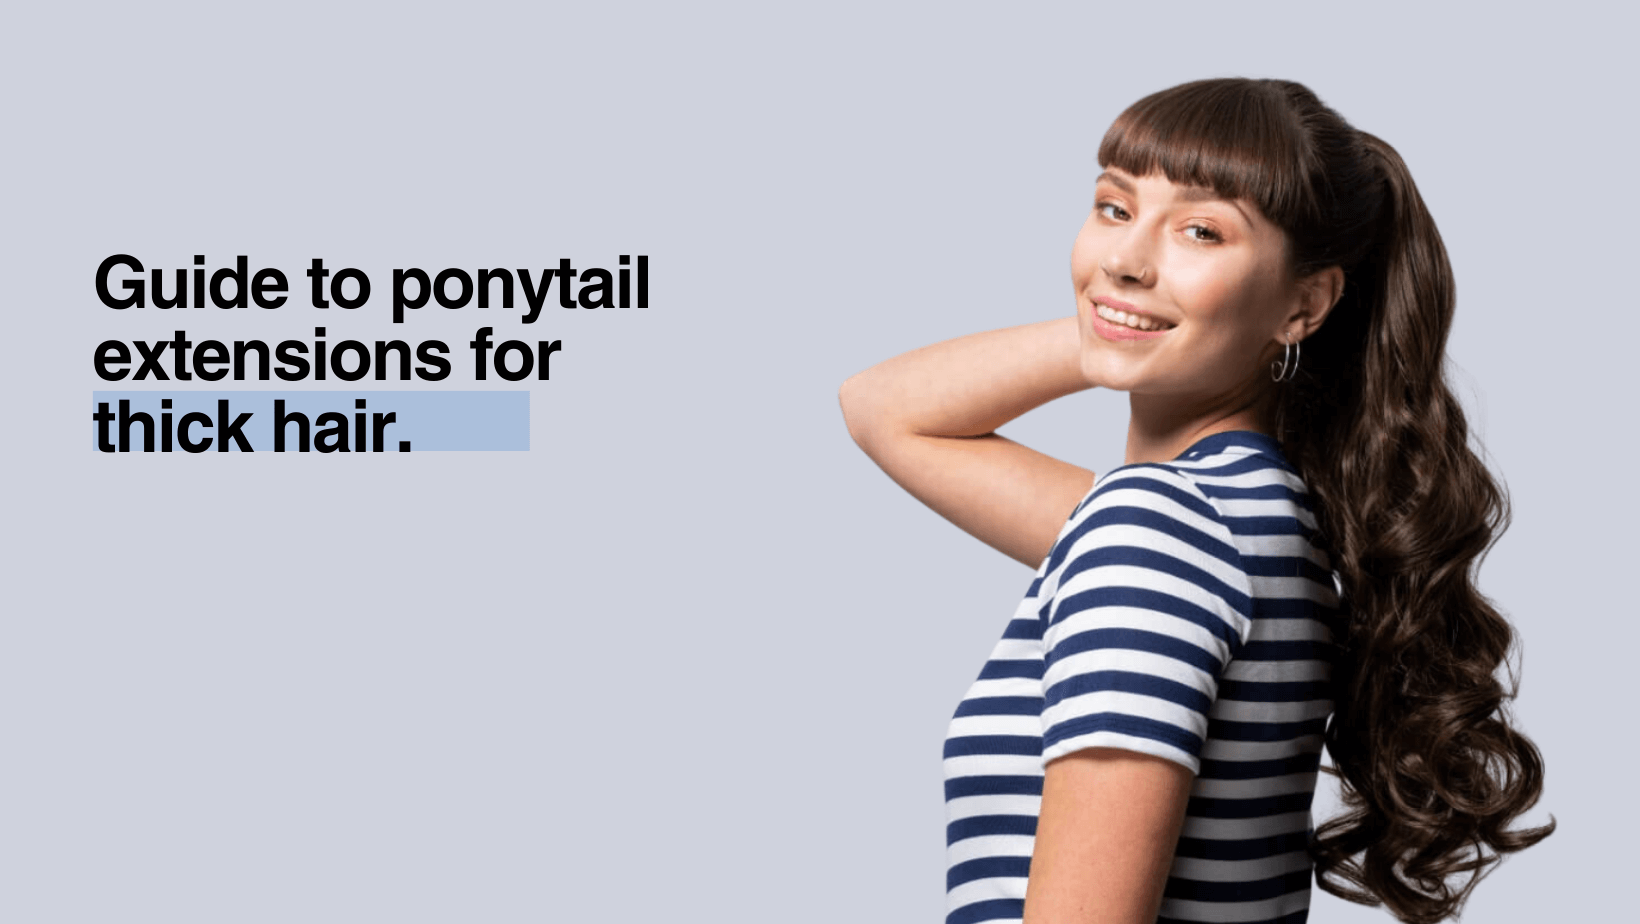 Guide to Ponytail Extensions for Thick Hair